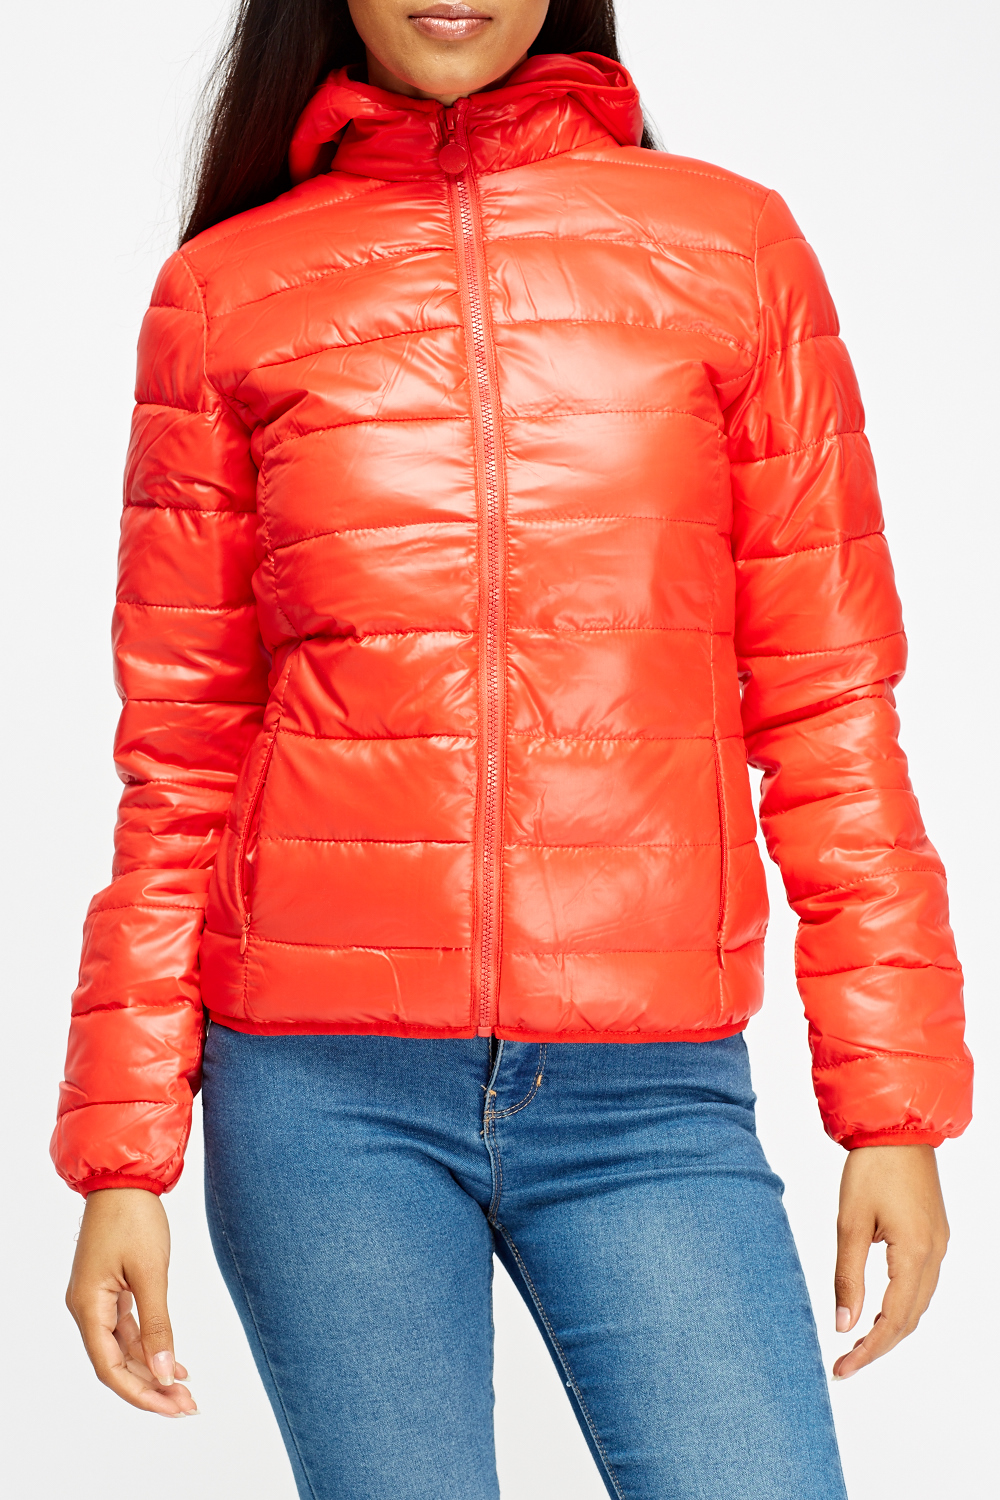 Red Puffa Hooded Jacket - Just $7